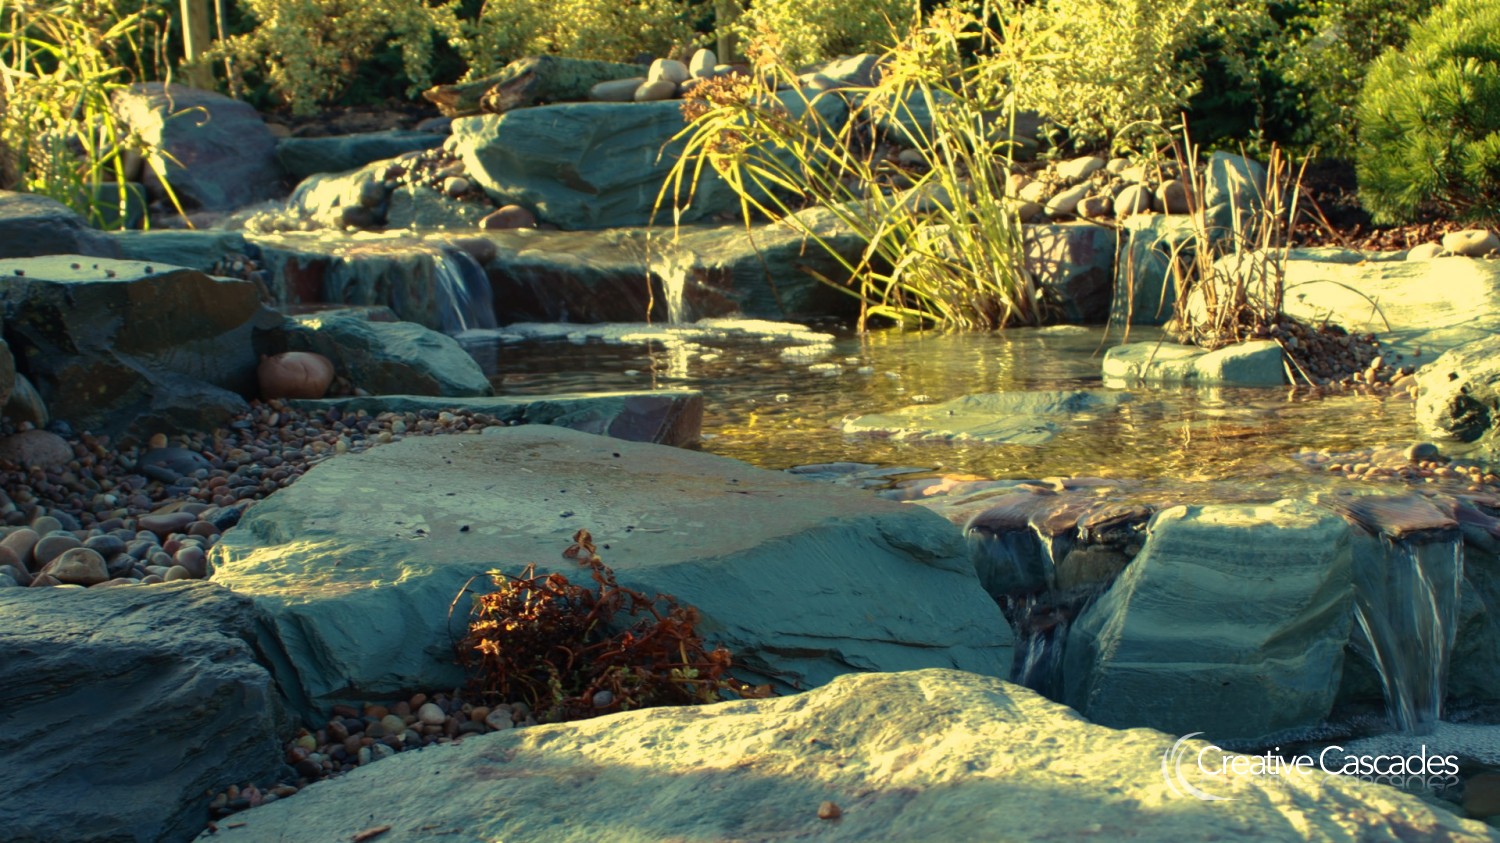 Love goes into the placing of every rock  - Landscaping and Water Features -  Creative Cascades